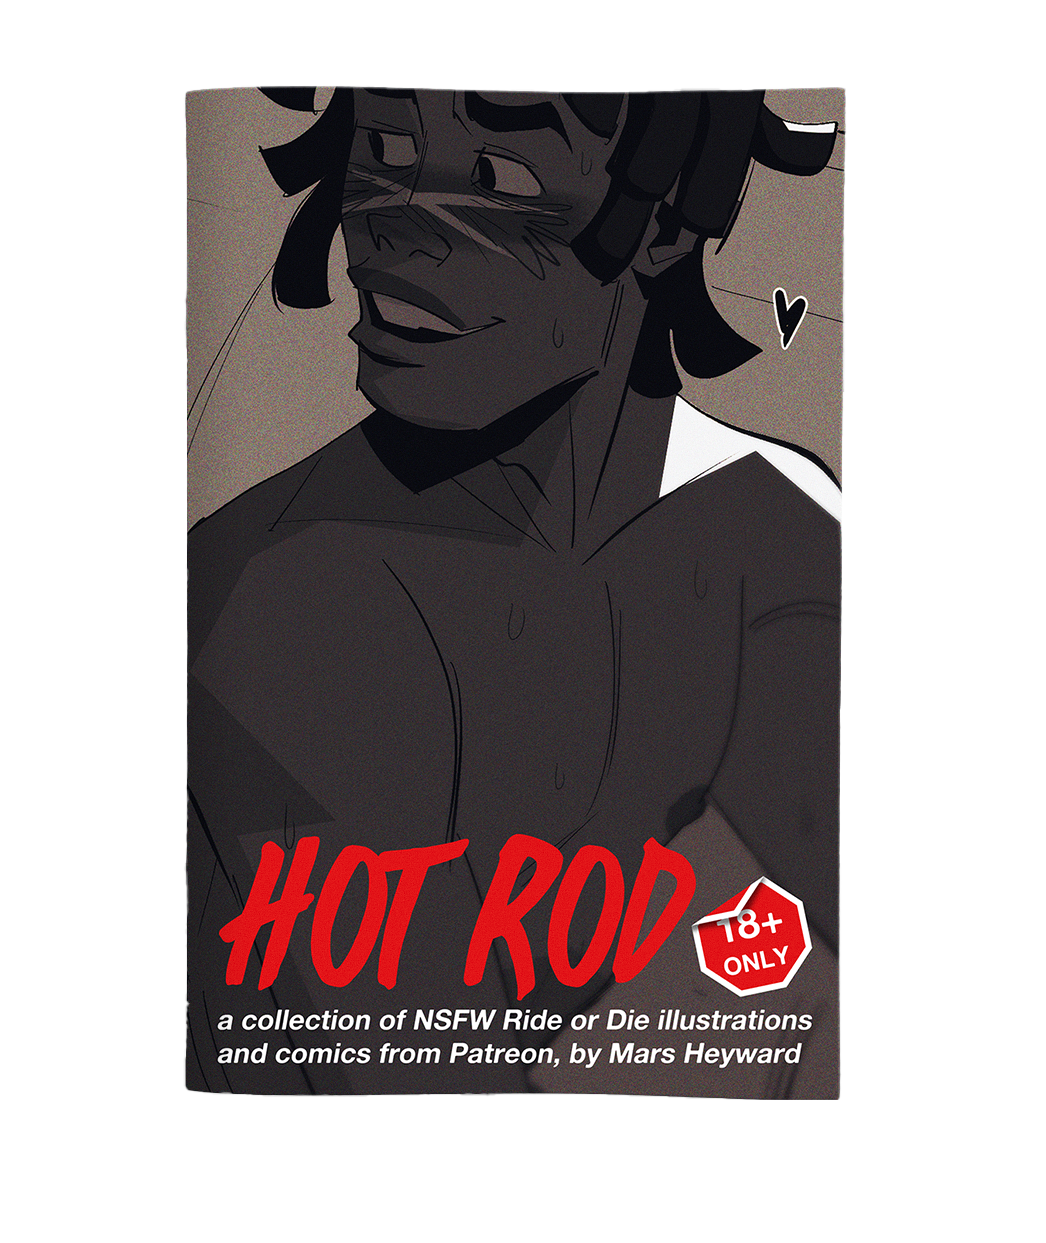 A zine from Mars Heyward titled "Hot Rod; a collection of NSFW Ride or Die illustrations and comics from Patreon, by Mars Heyward". There is a person in black and white illustrated on the front. 